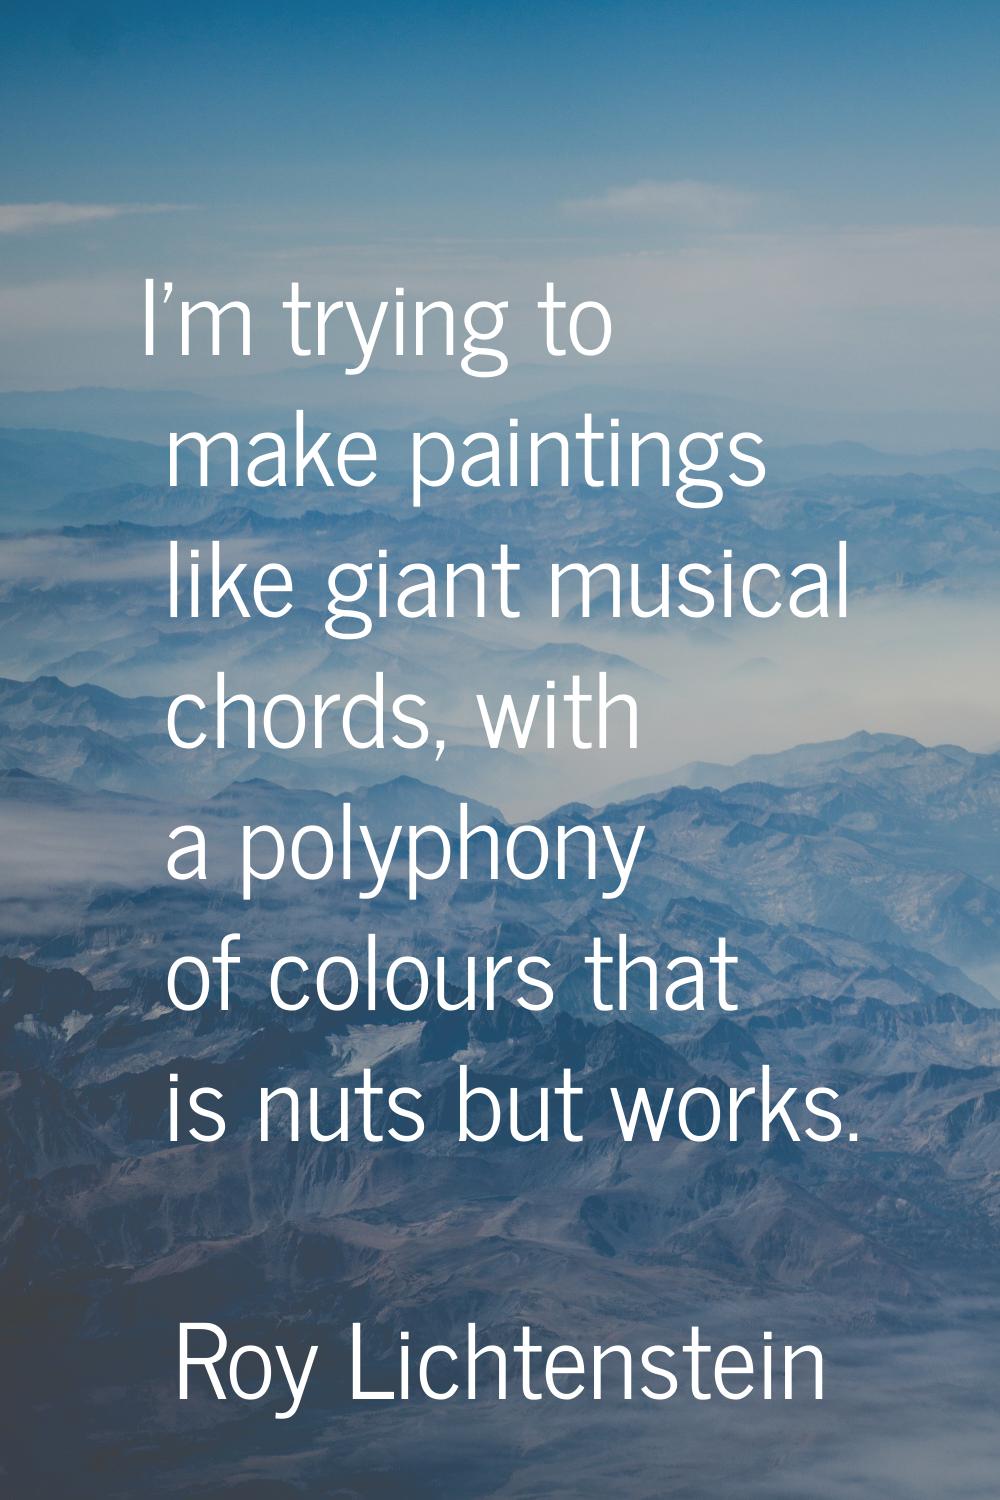 I'm trying to make paintings like giant musical chords, with a polyphony of colours that is nuts bu